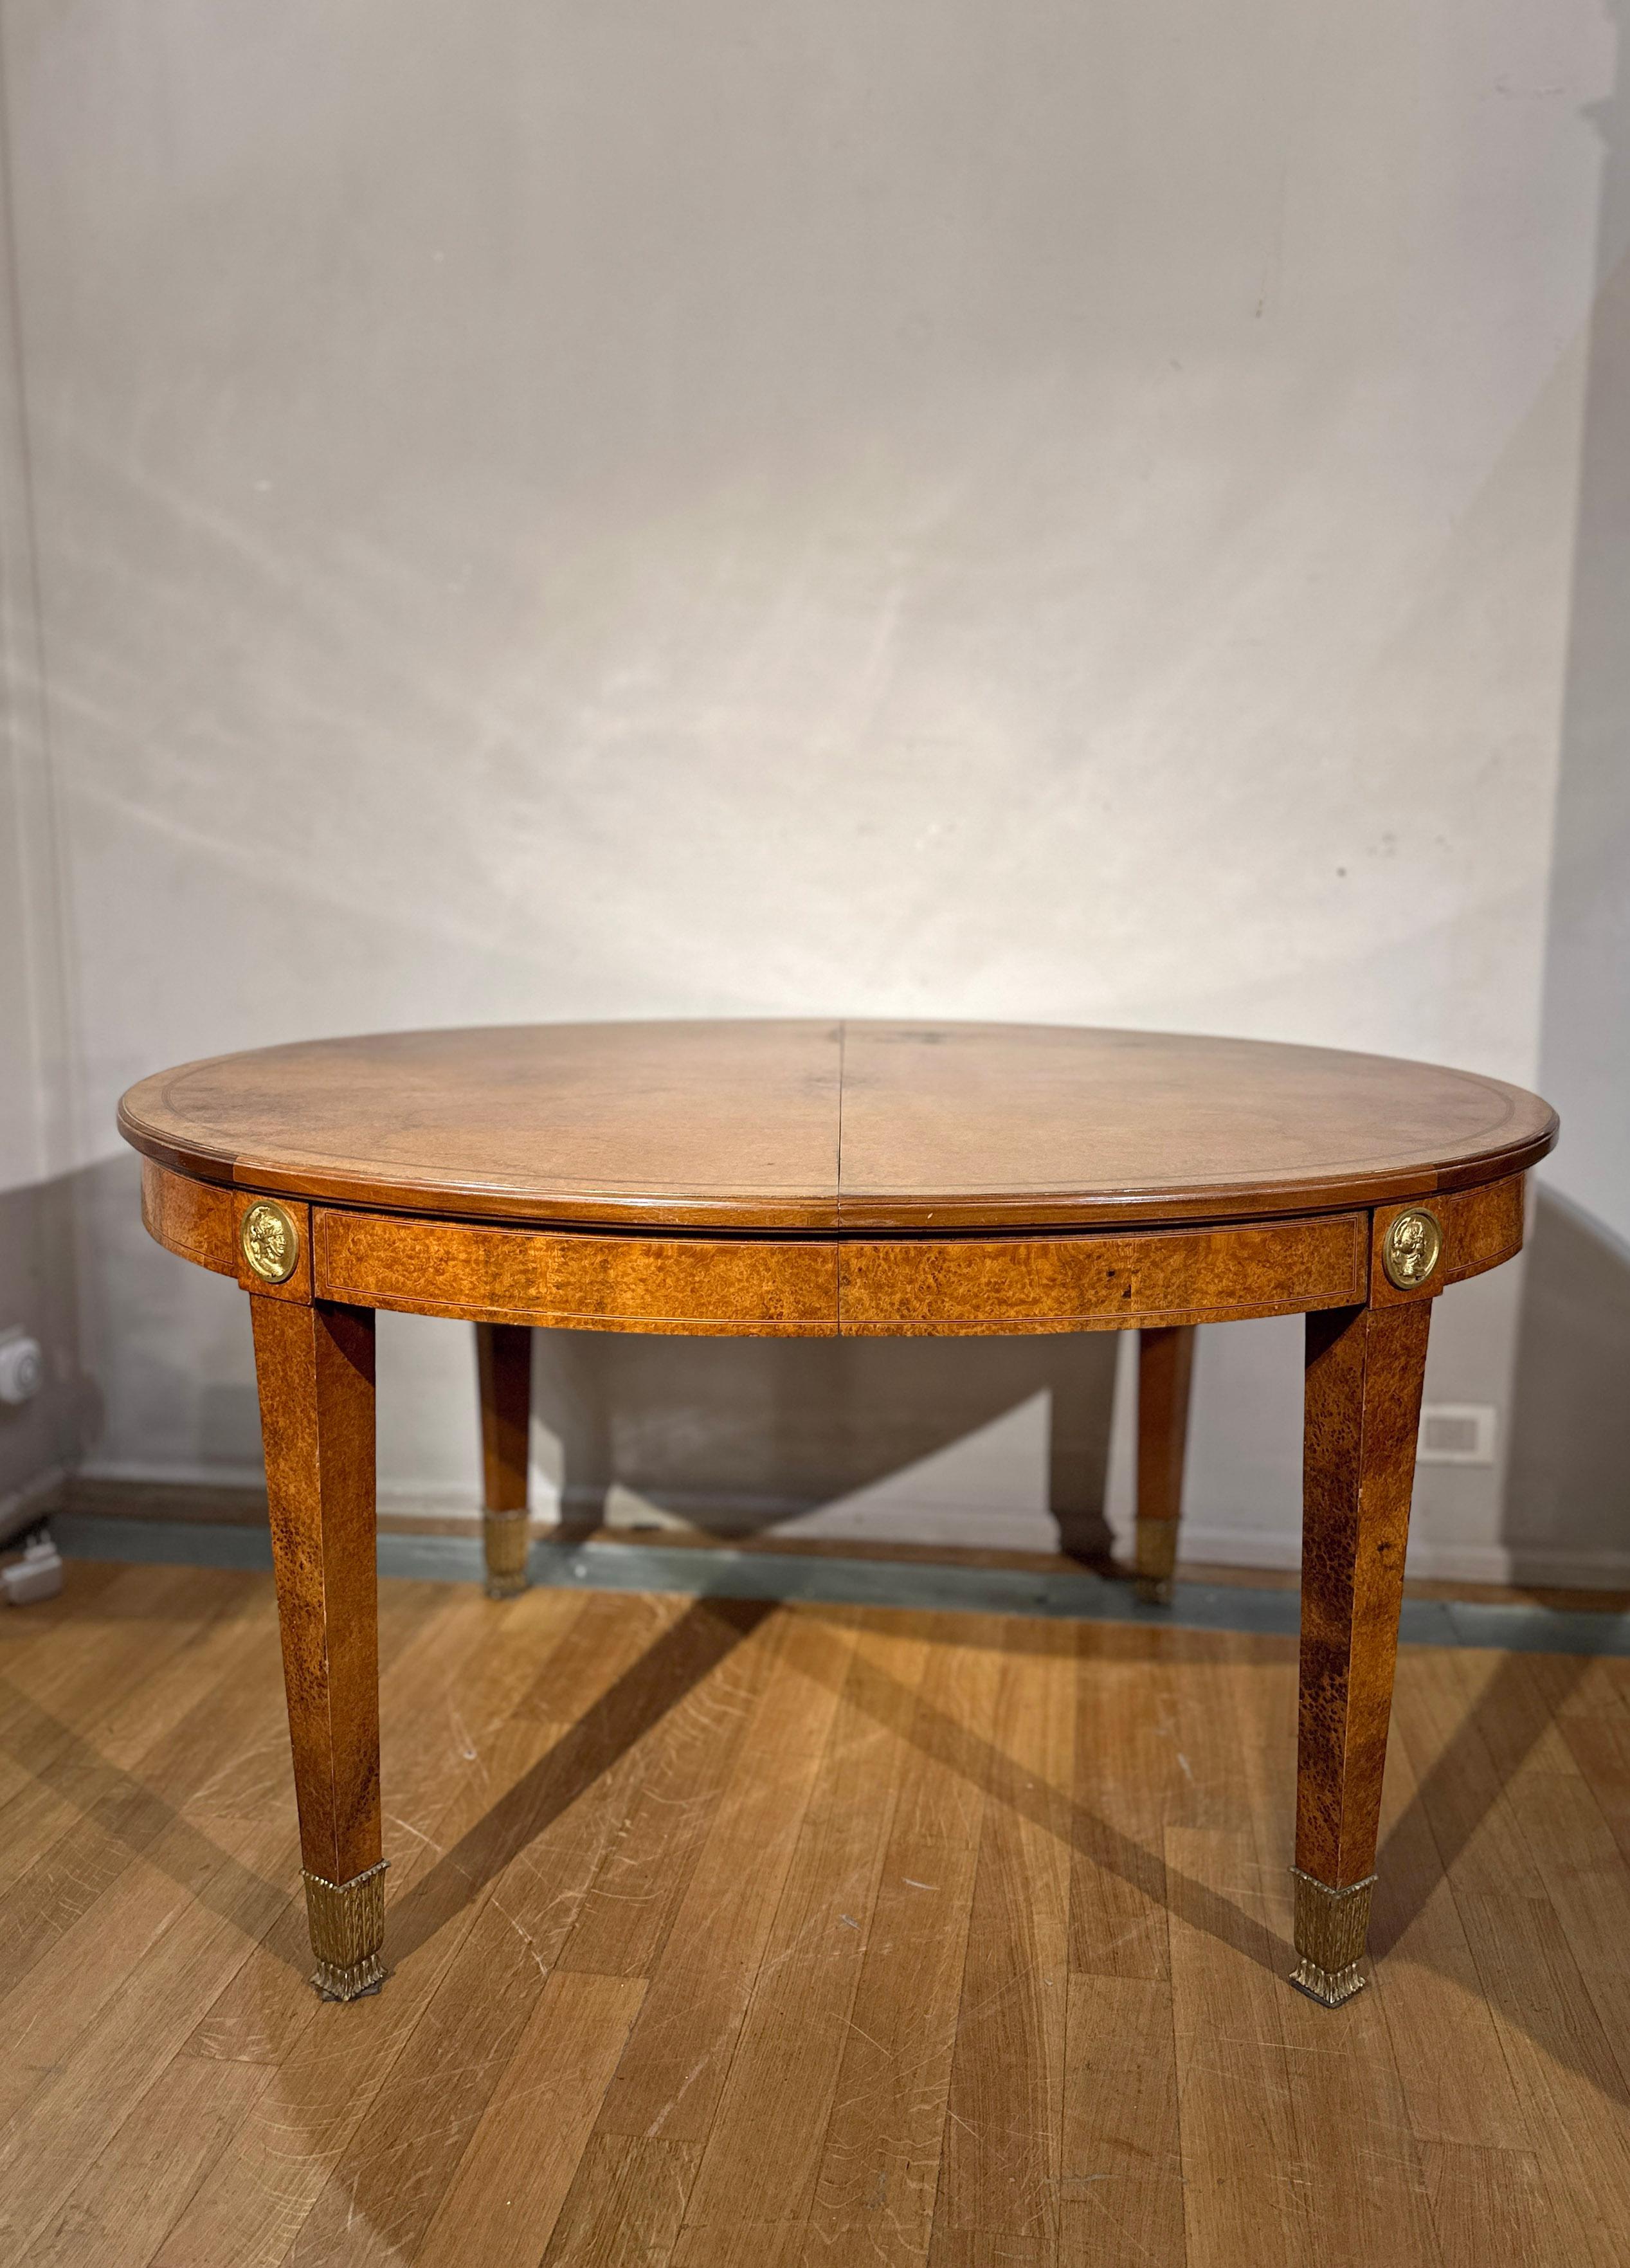 Splendid oval table in maple wood with gilt bronze finishes. The medallion finishes on the lower band depict characters from ancient iconography, while the leaf shoes on the four truncated pyramid legs add a touch of elegance. The table can be